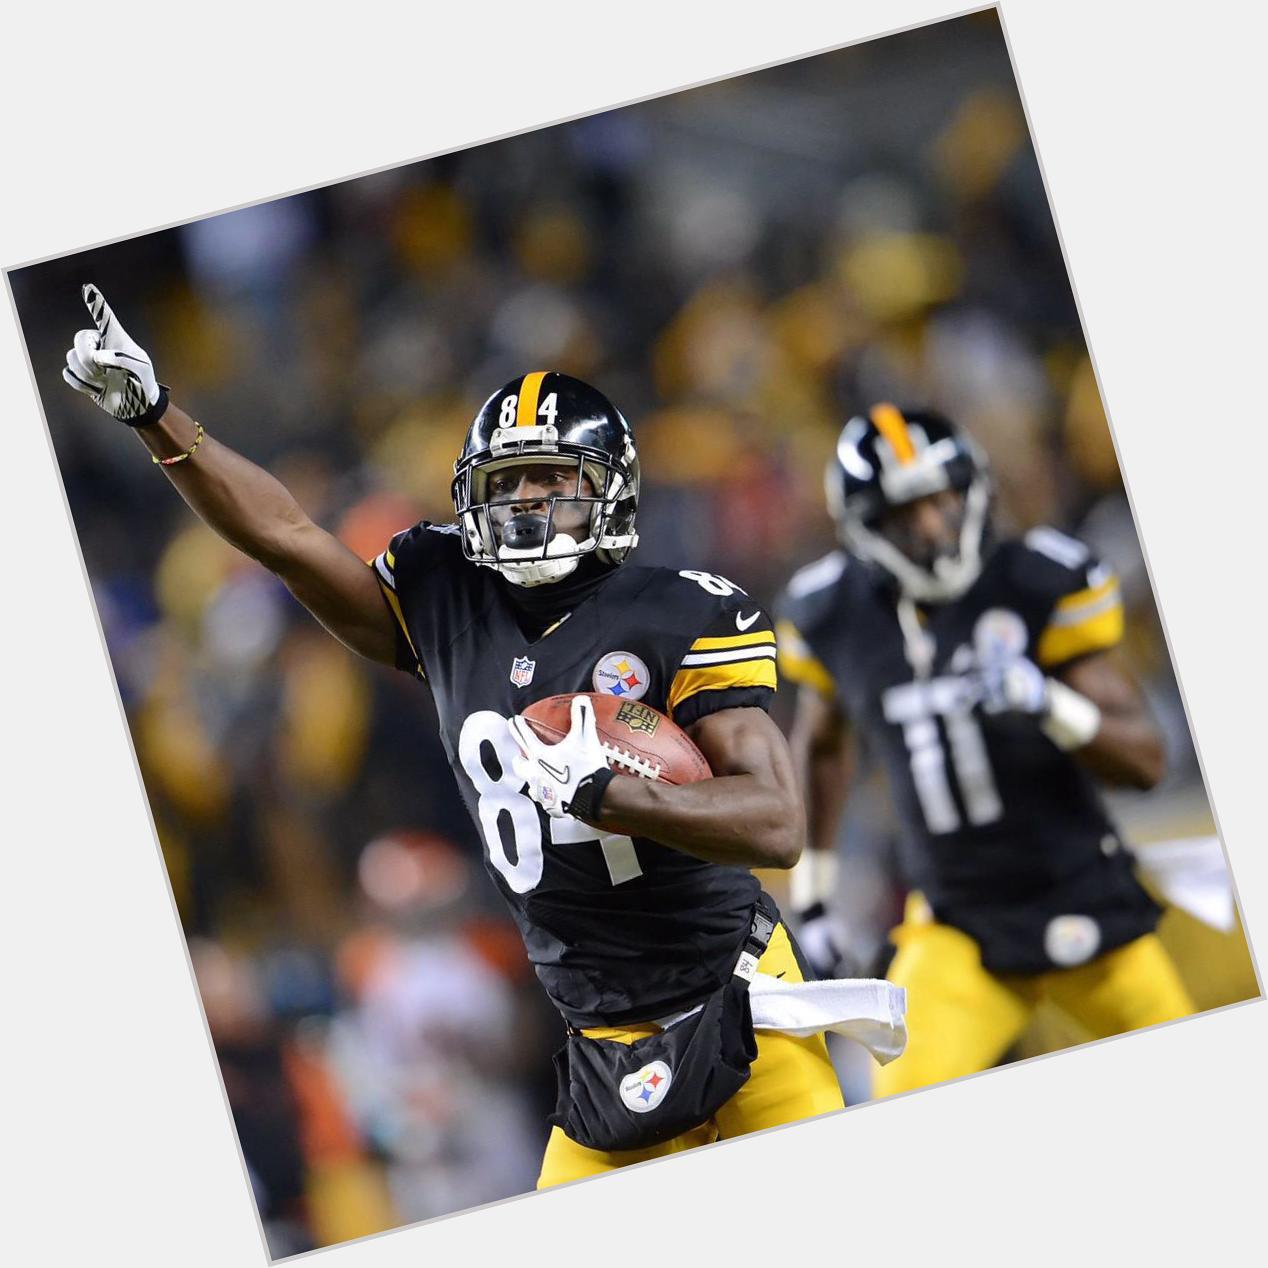   NFL_Stats: Happy 27th Birthday Antonio Brown

The only player to record at least 5 catches and 5 